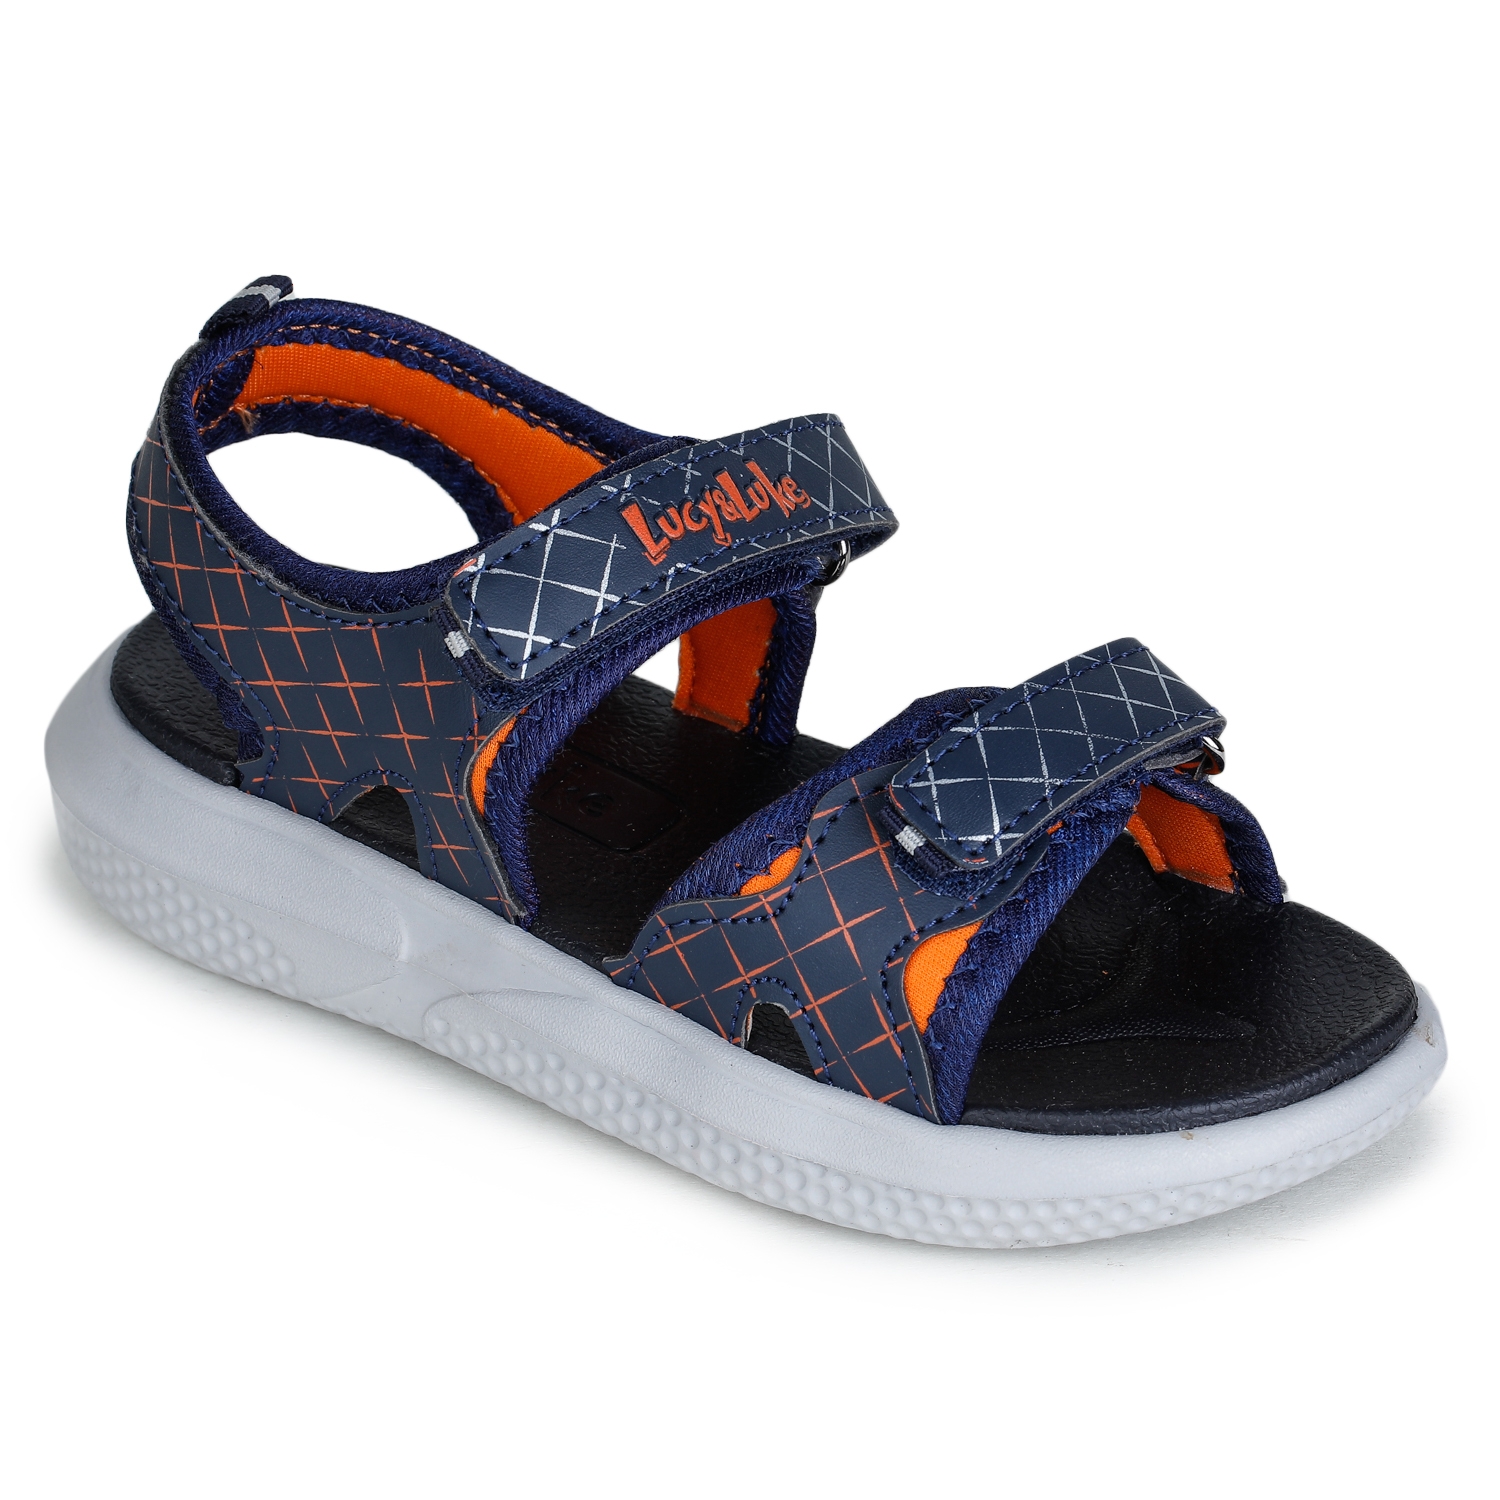 Lucy & Luke by Liberty HIPPO-4 Blue Sandals for Kids